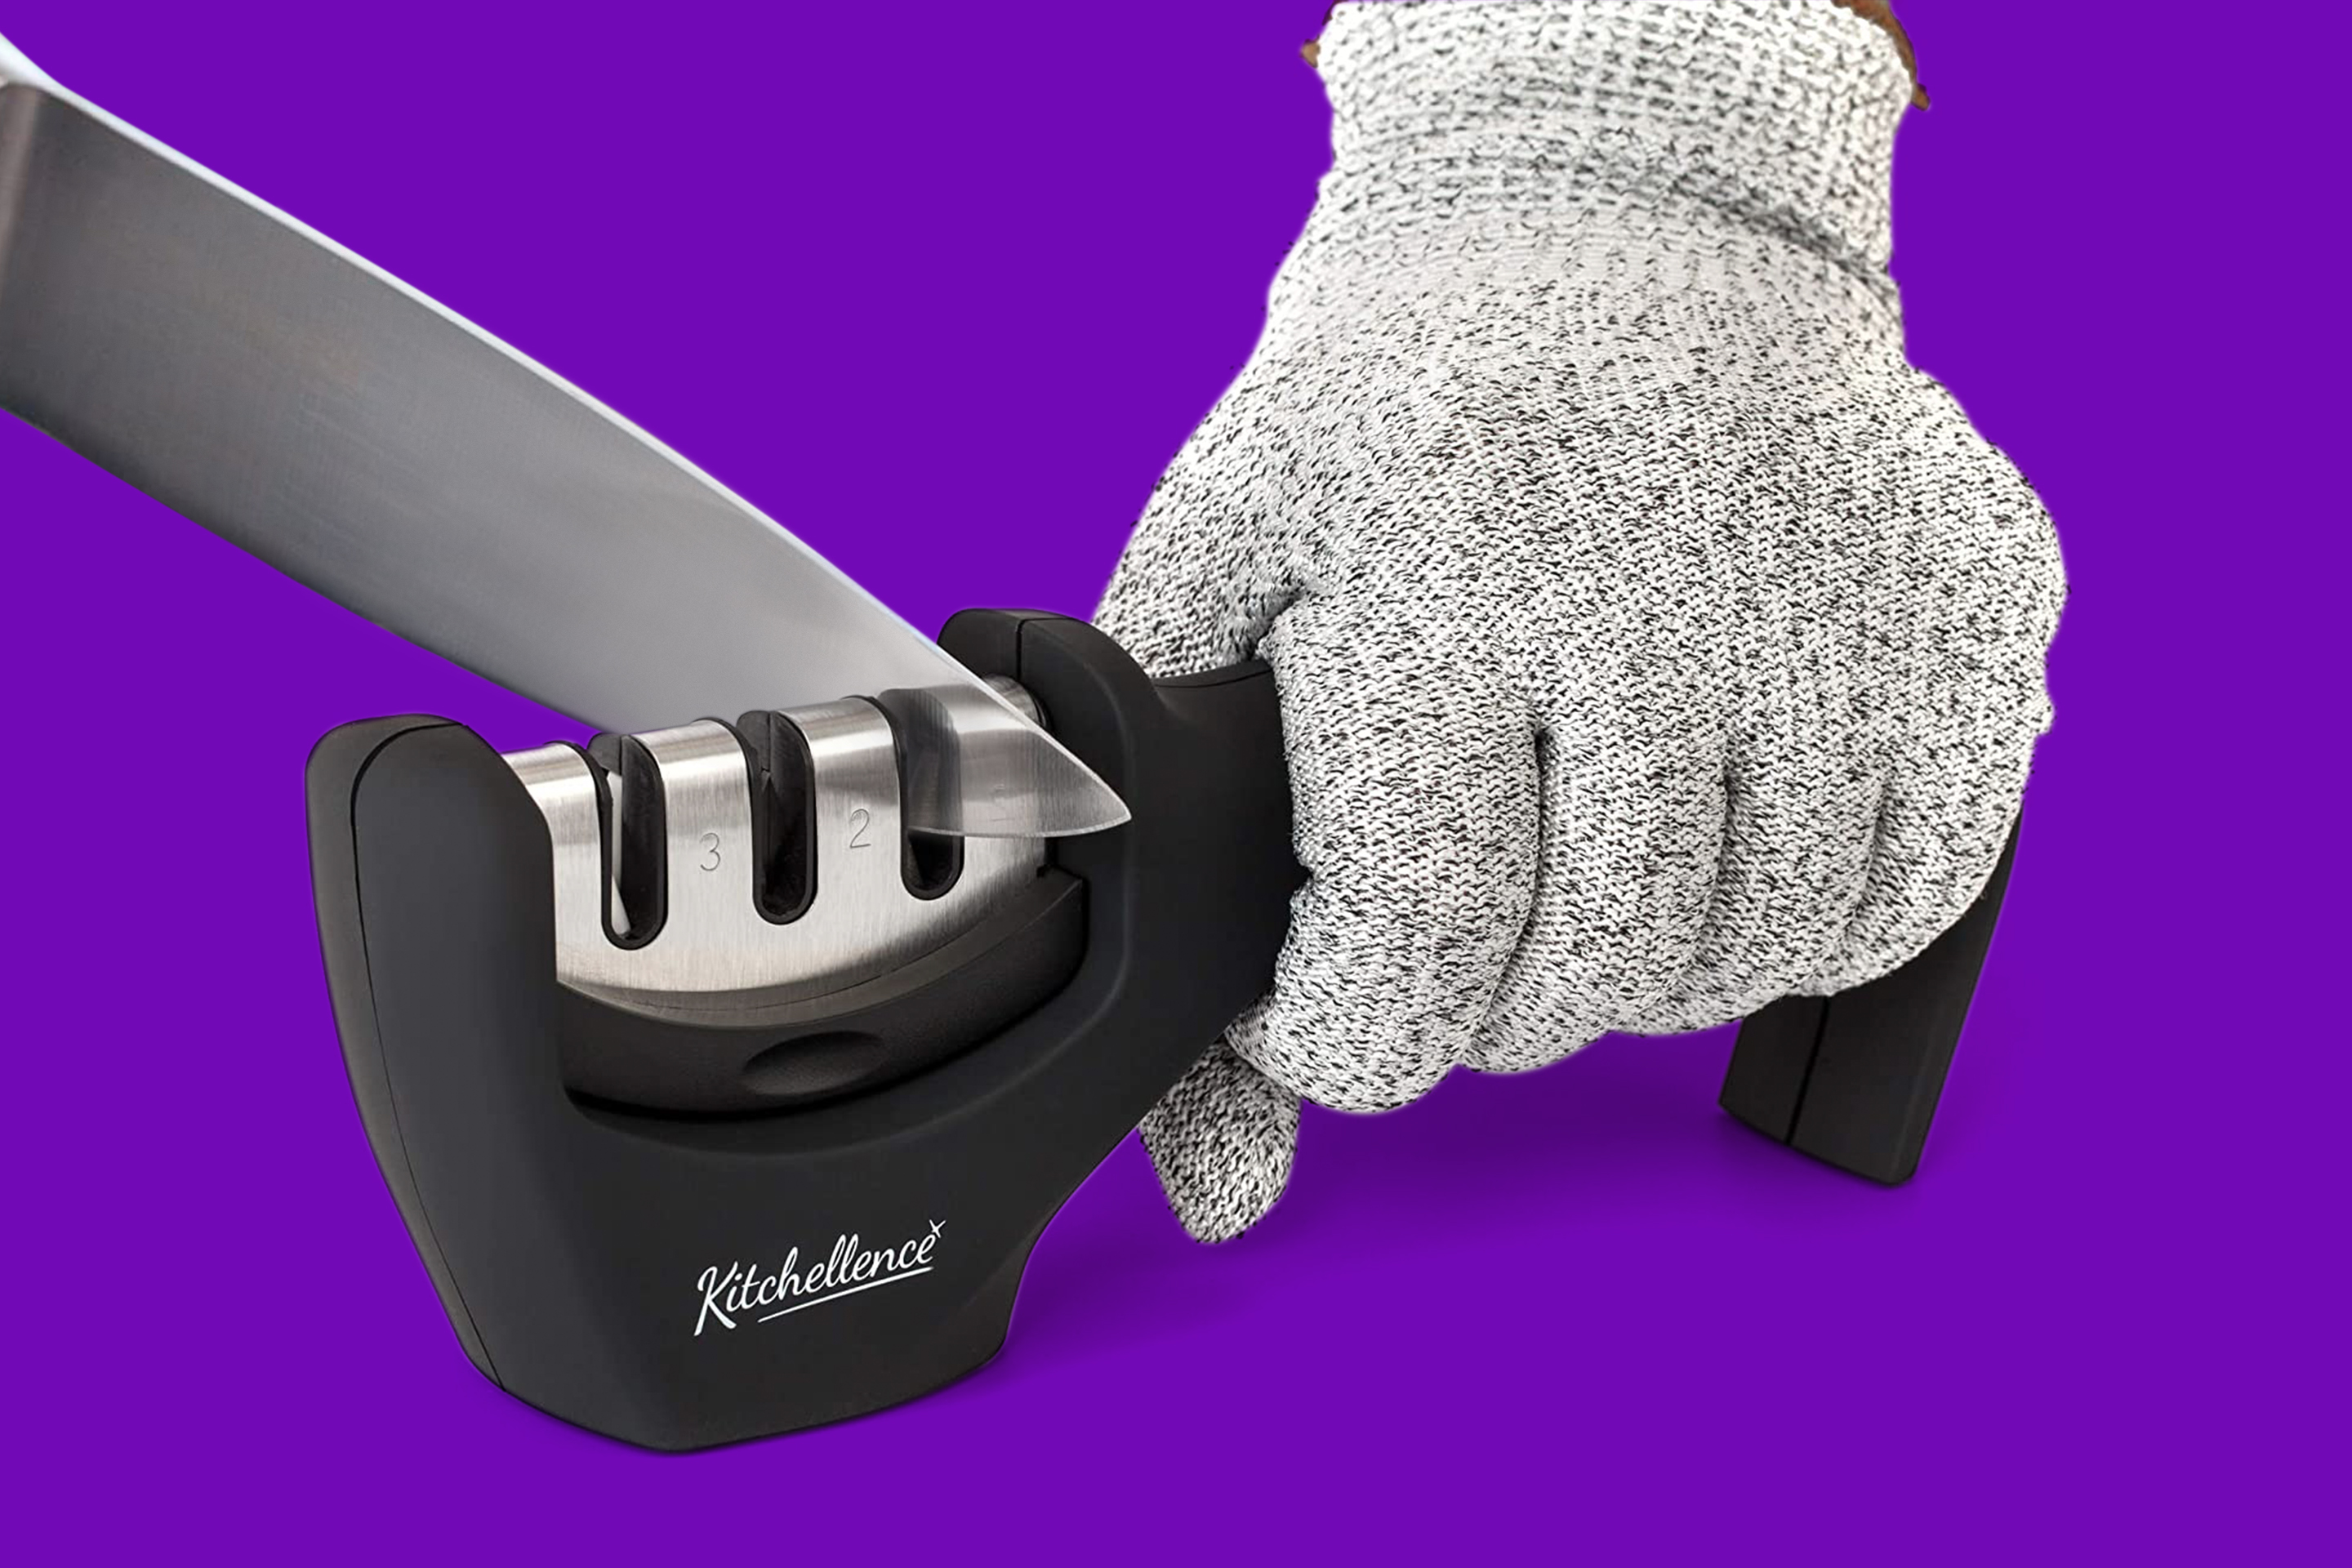 The Best Knife Sharpeners for Your Money